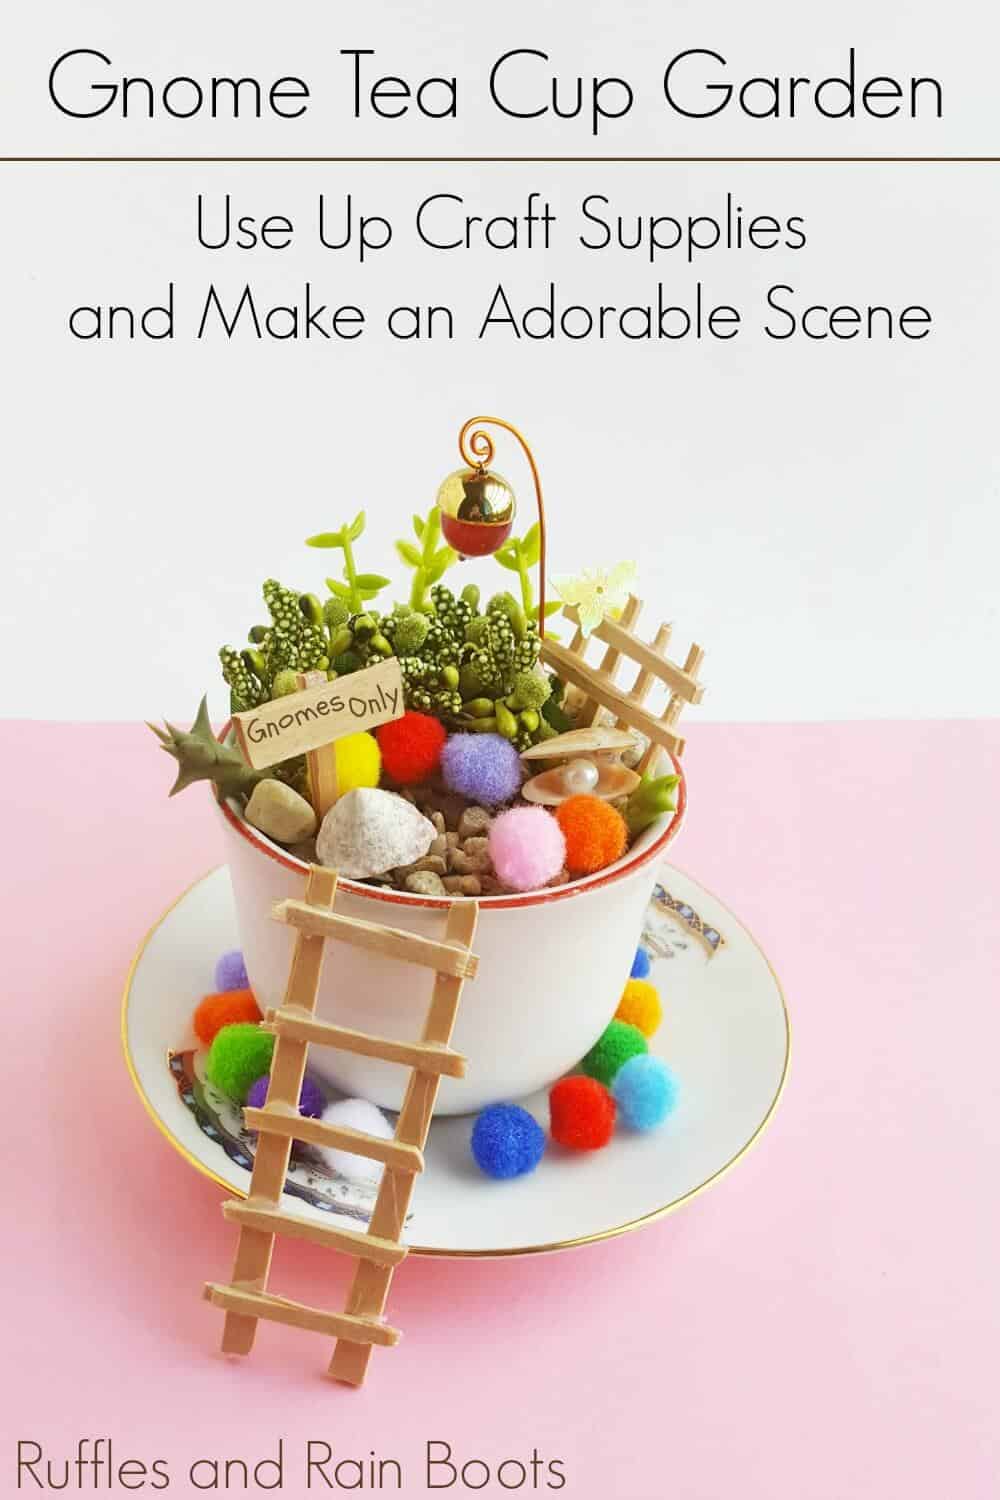 Vertical gnome teacup garden on a white and pink background with text which reads Gnome Tea Cup Garden use up craft supplies and make an adorable scene.